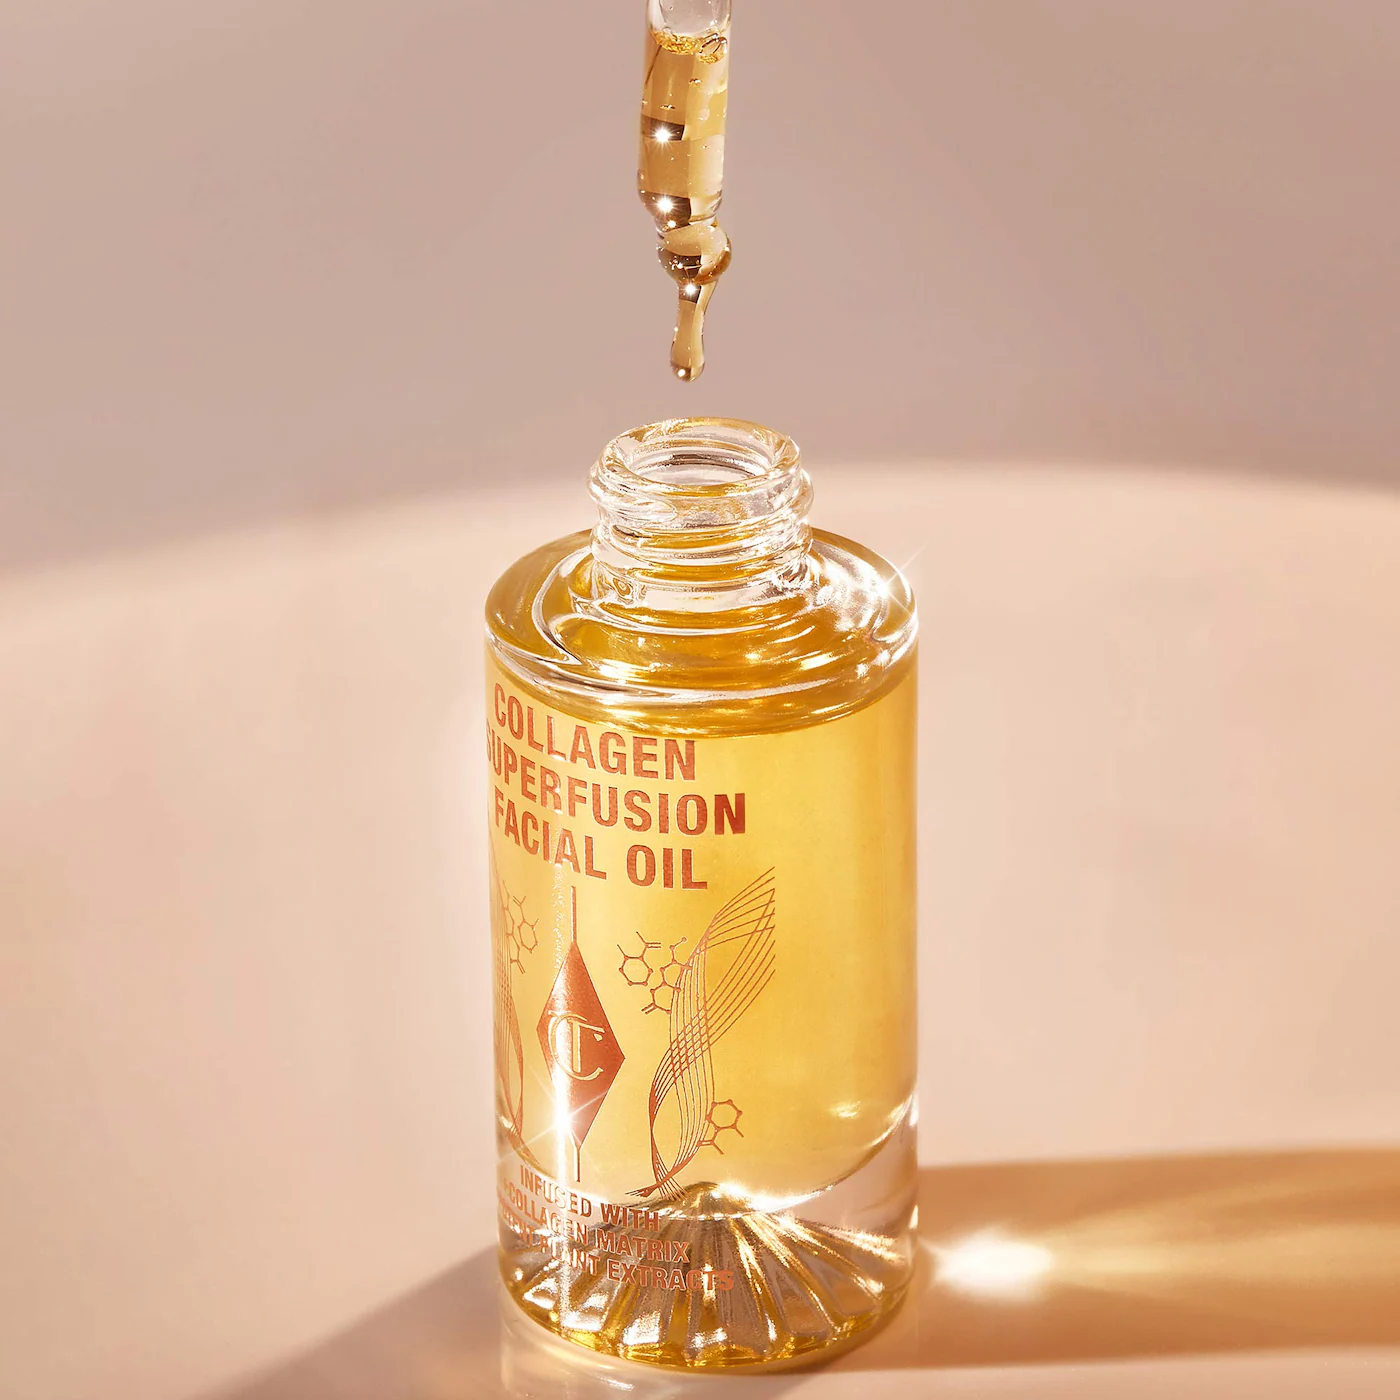 Charlotte Tilbury - Коллагеновое масло для лица Collagen Superfusion Firming &amp; Plumping Facial Oil - Фото 2